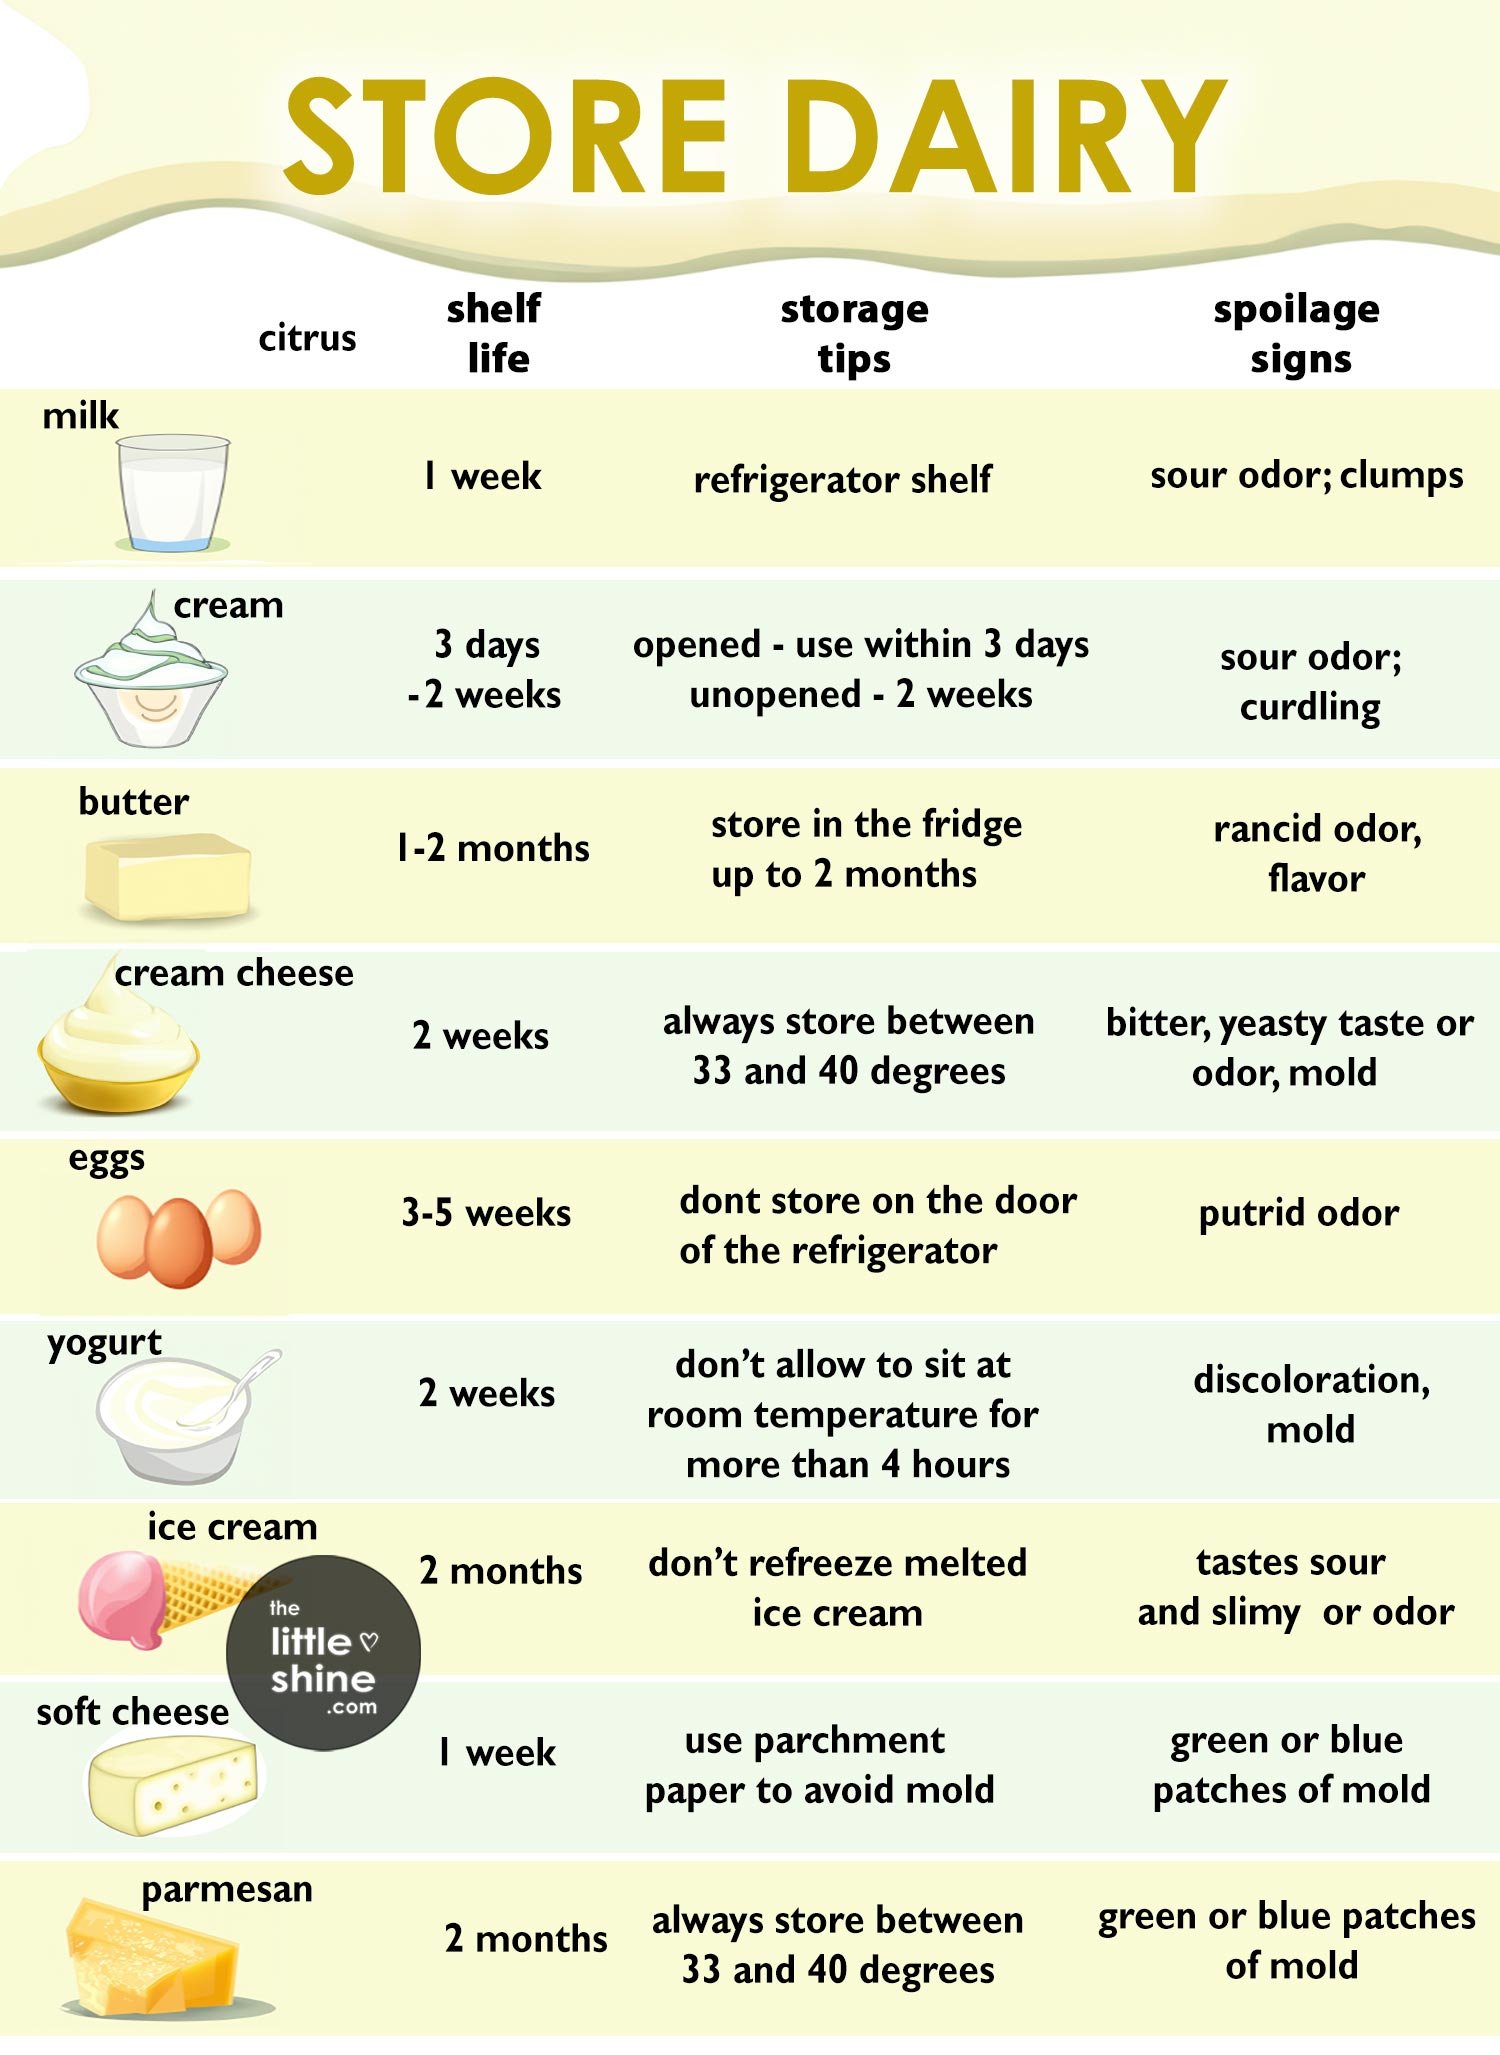 21 Types of Onions: Taste and Uses